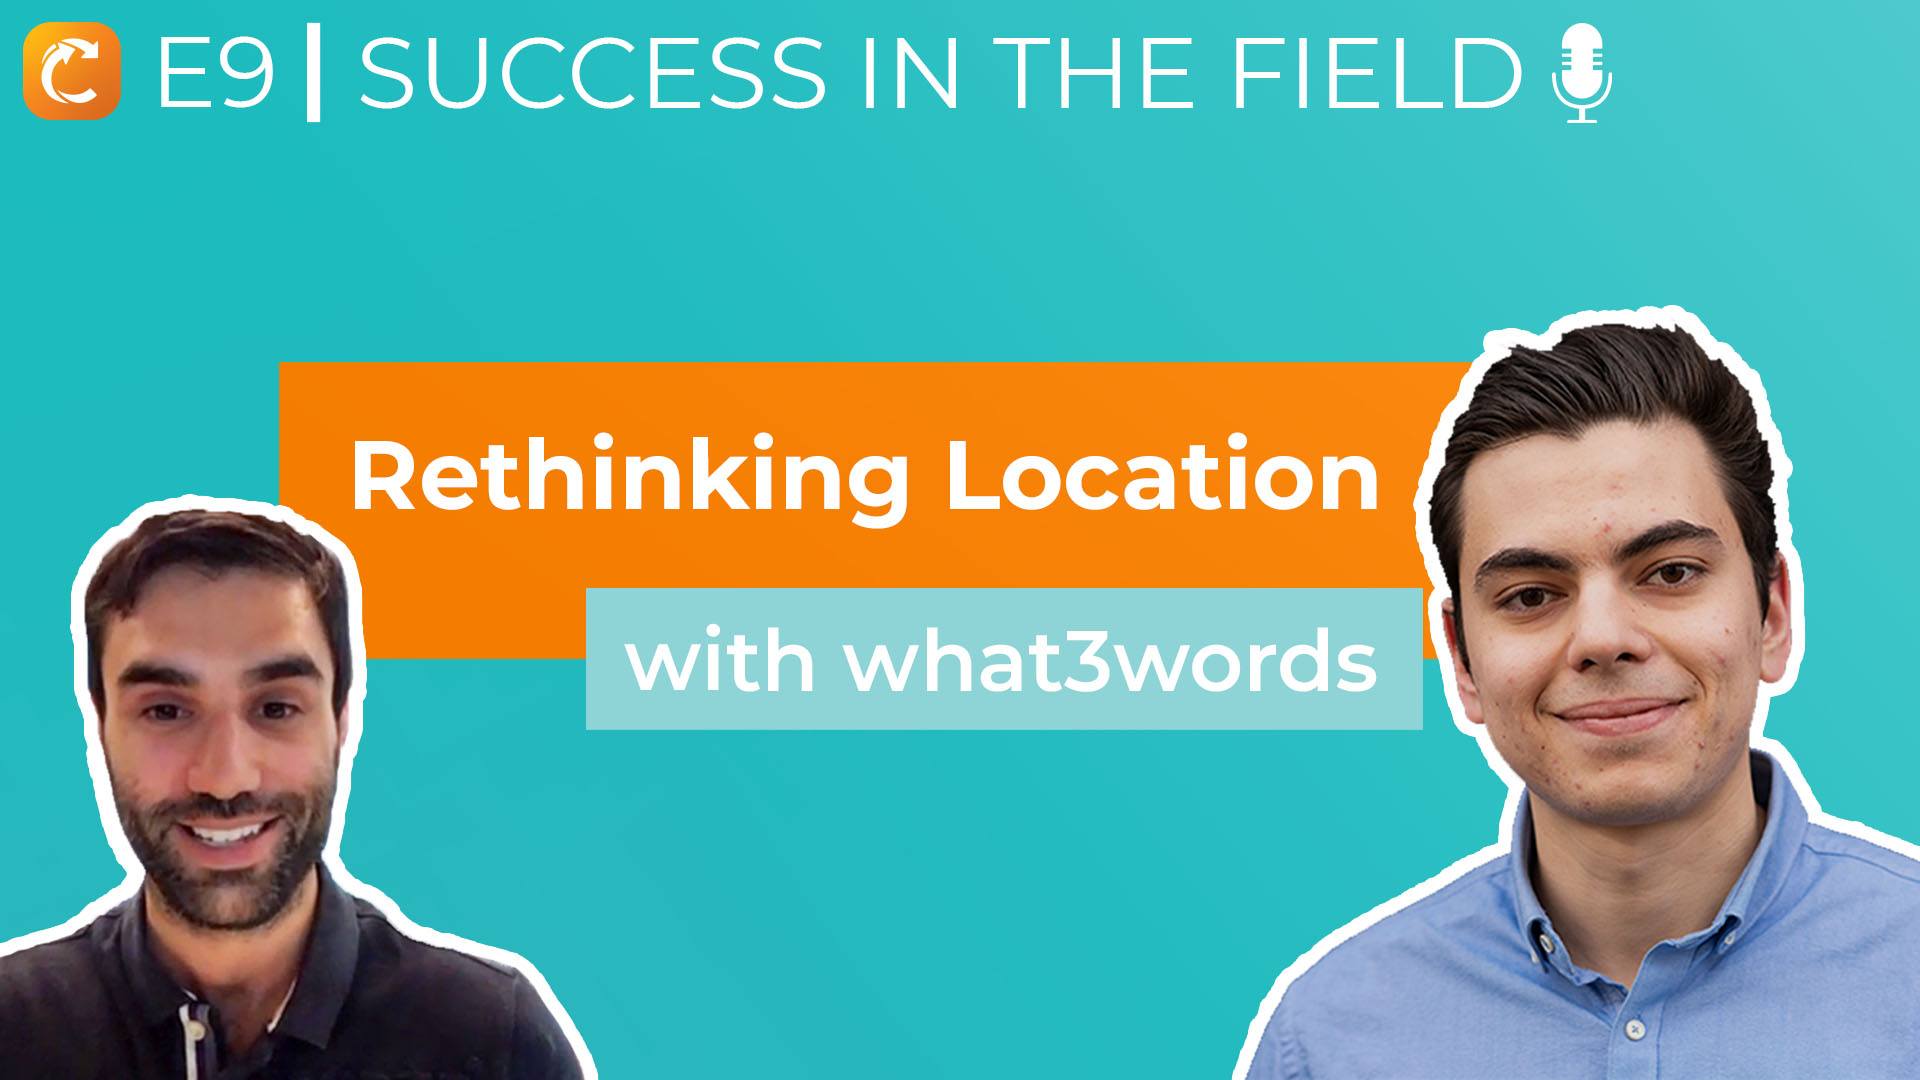 Ep. 9 | Innovation in Location and Easy Addresses with what3words